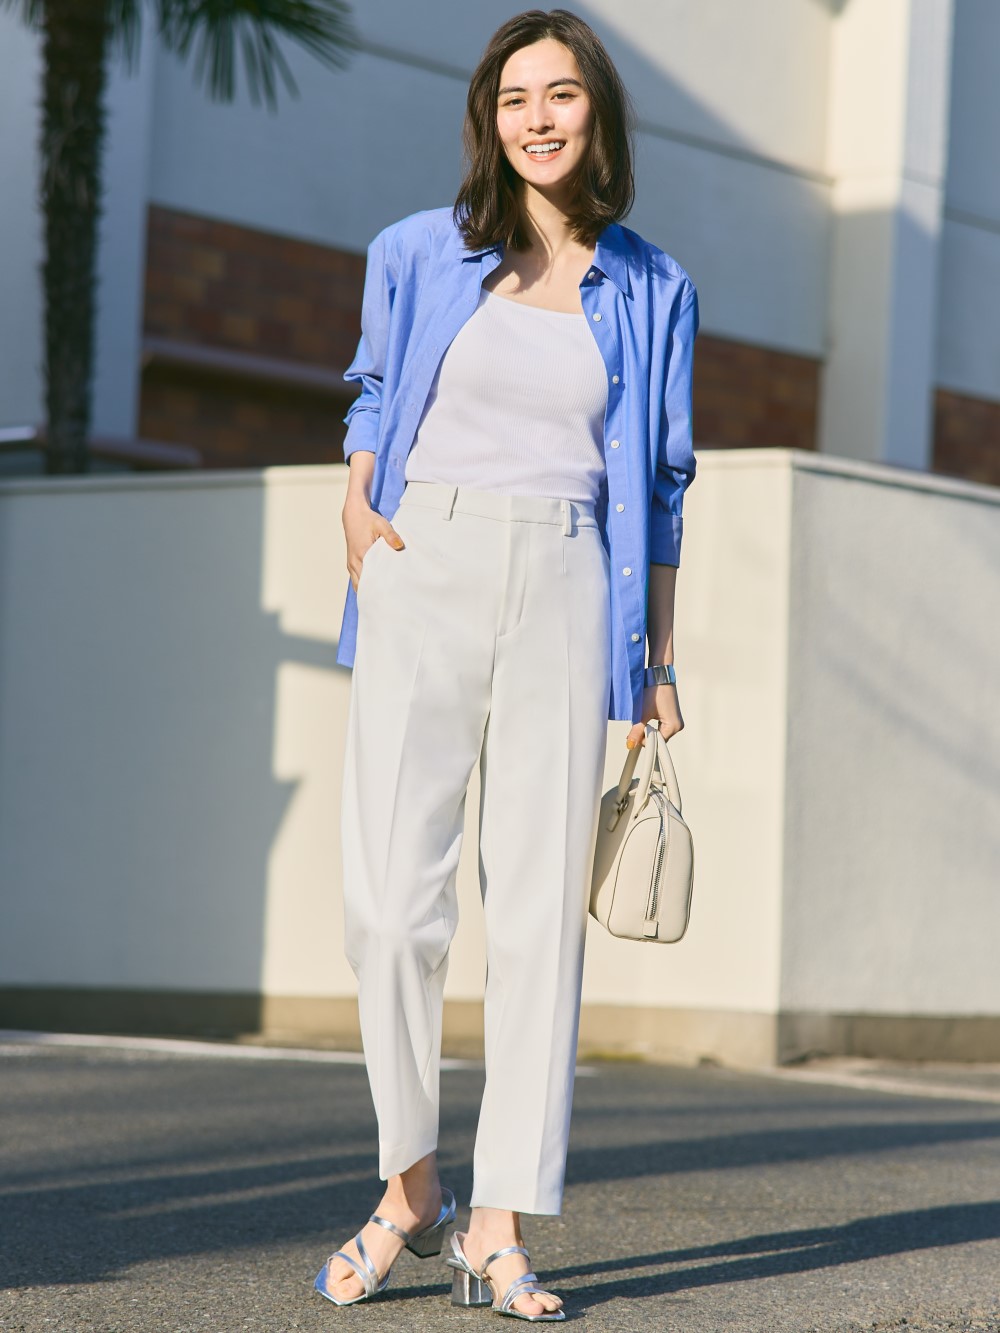 Shop looks for「Smart Ankle Pants」